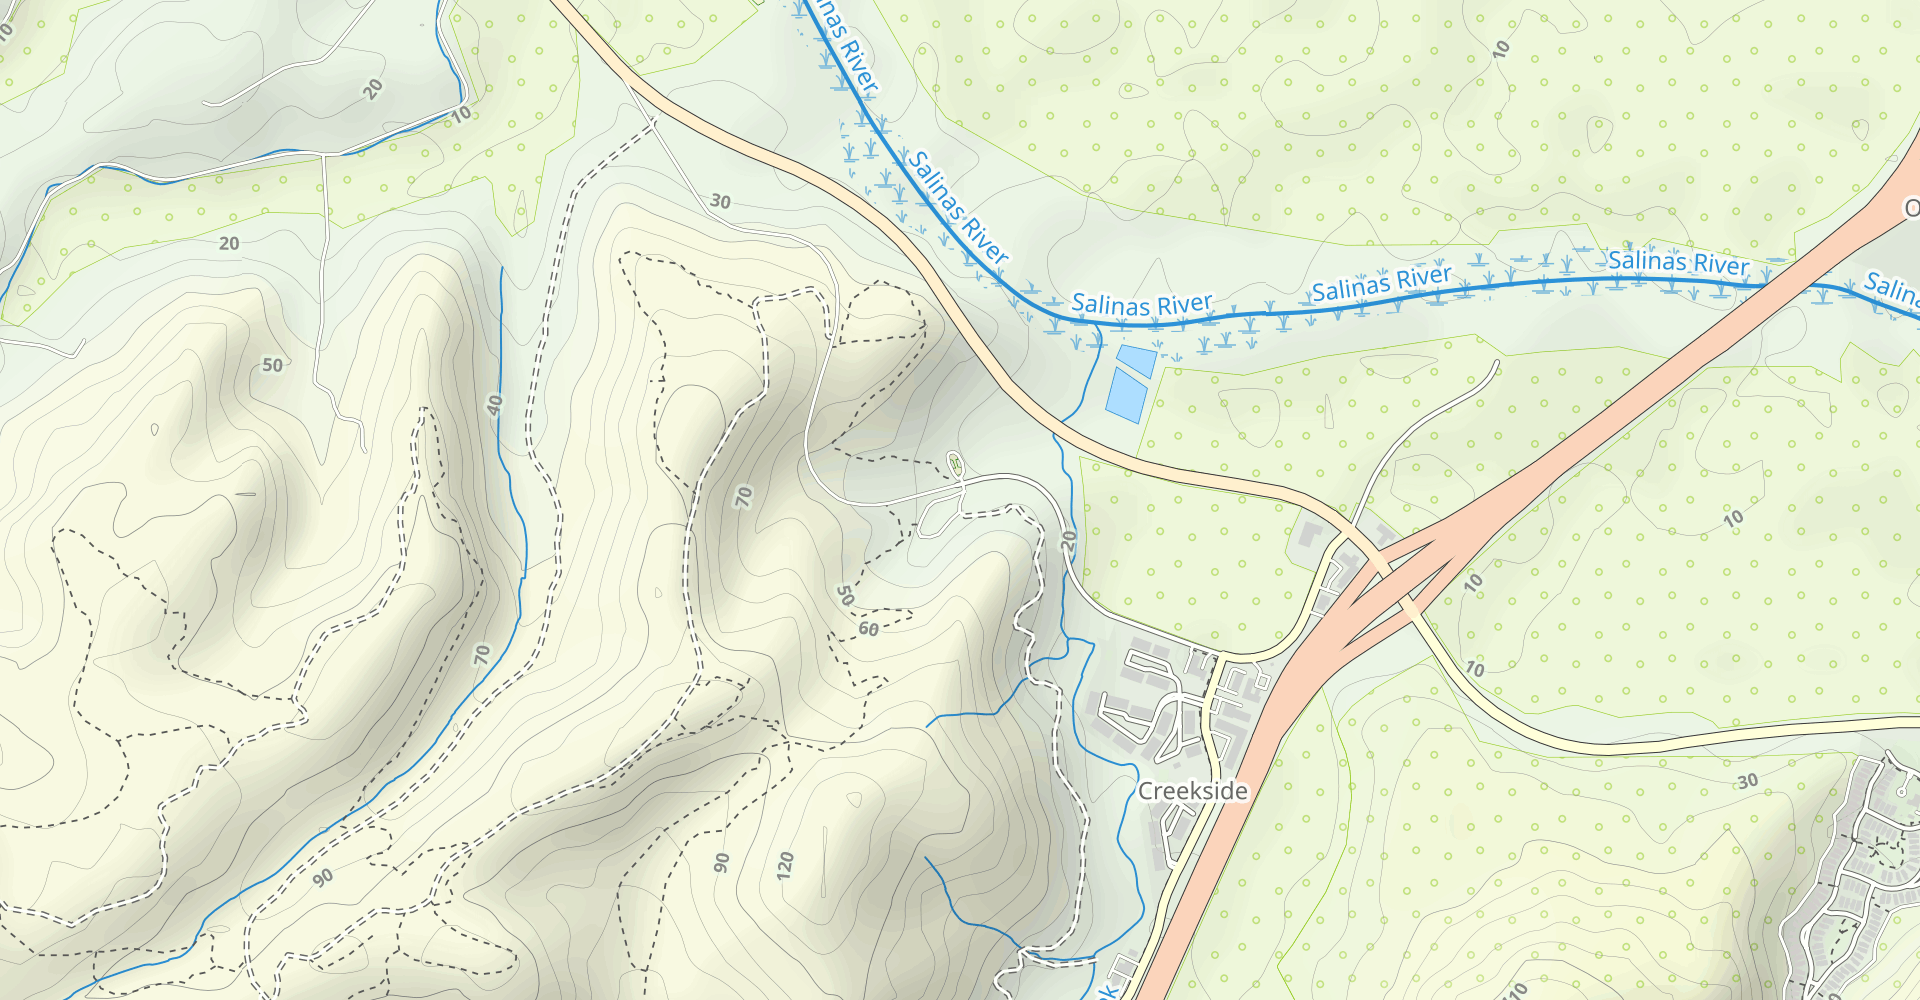 Trail 30, Engineer Road, Oil Well Road, and Trail 101 Loop